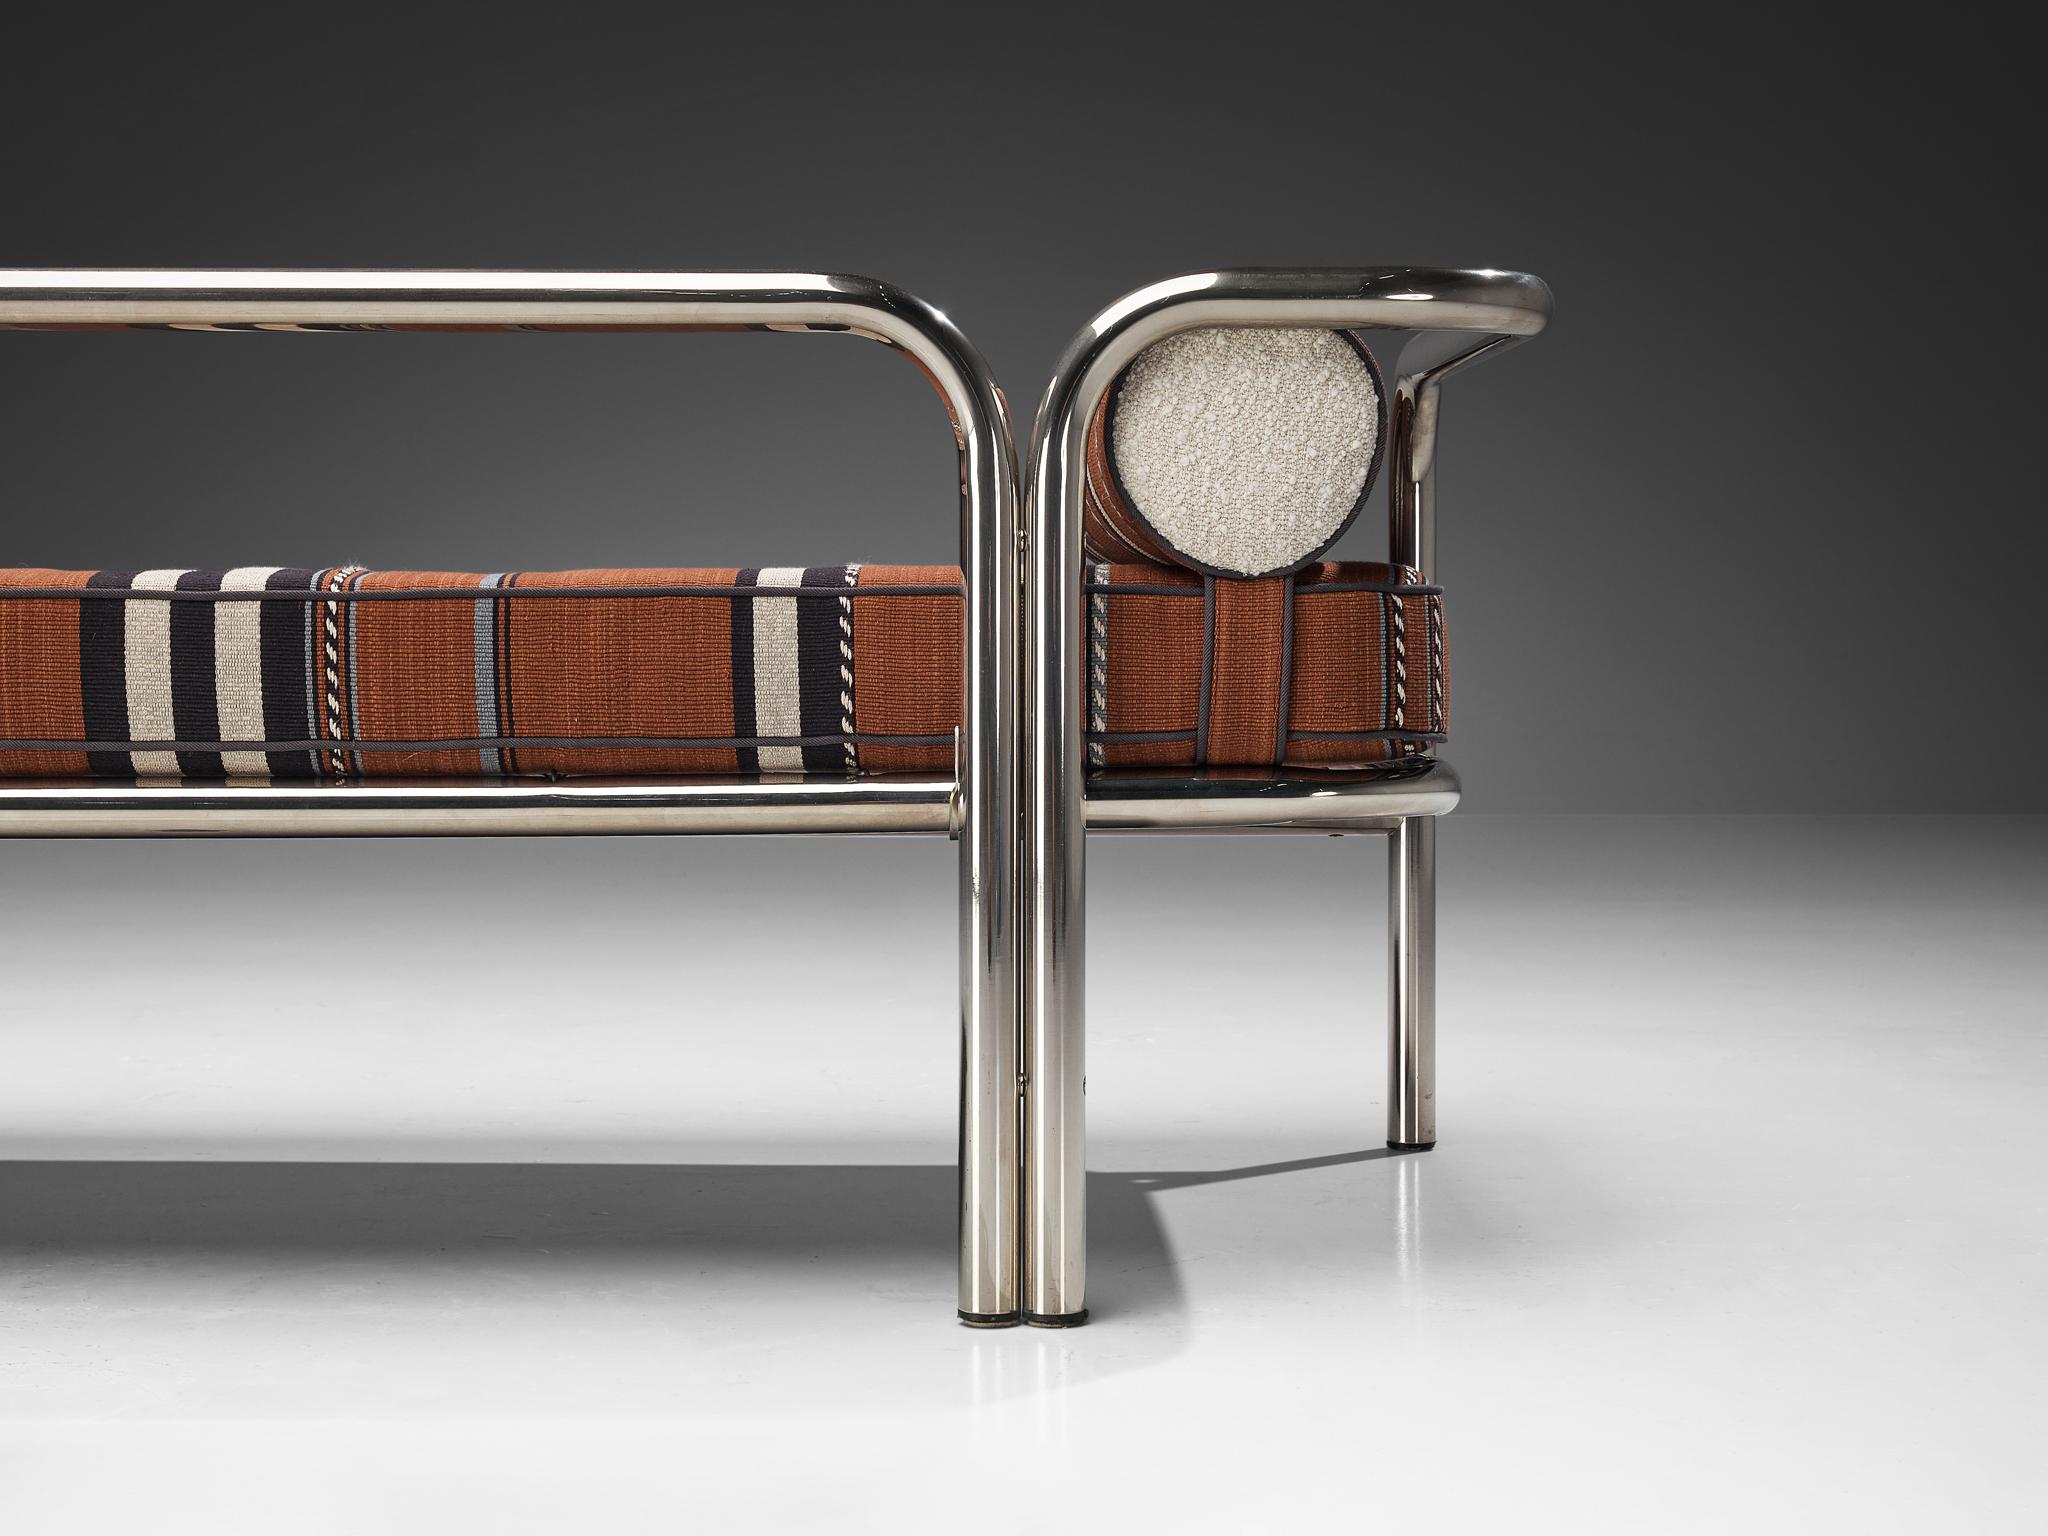 Italian Gae Aulenti for Poltronova 'Locus Solus' Daybed in Chrome-Plated Steel 